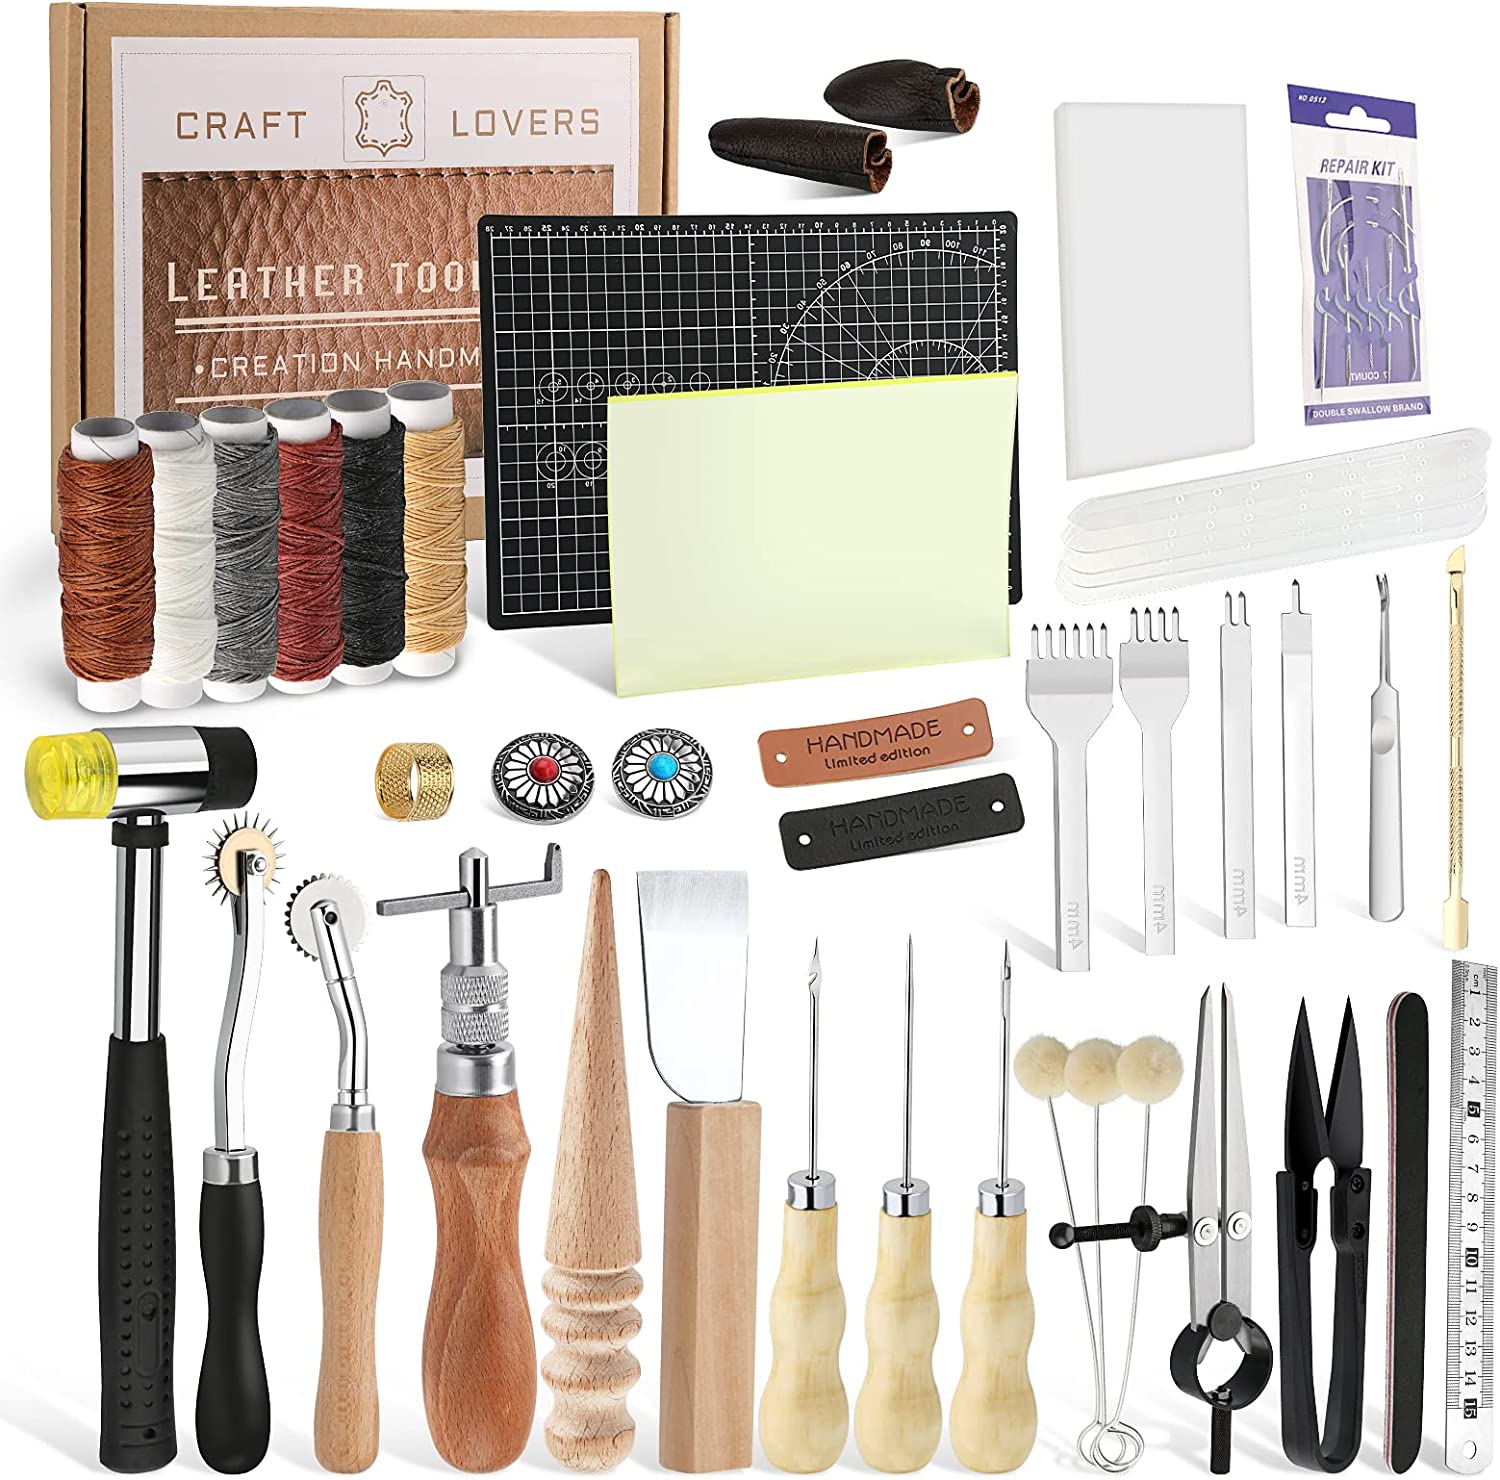 Leather Working Tools and Supplies Leather Craft Kits, Leather Sewing Kit,  Leather Starter Kit with Wax Ropes, Prong Punch, Awl, Belt Holes Templates